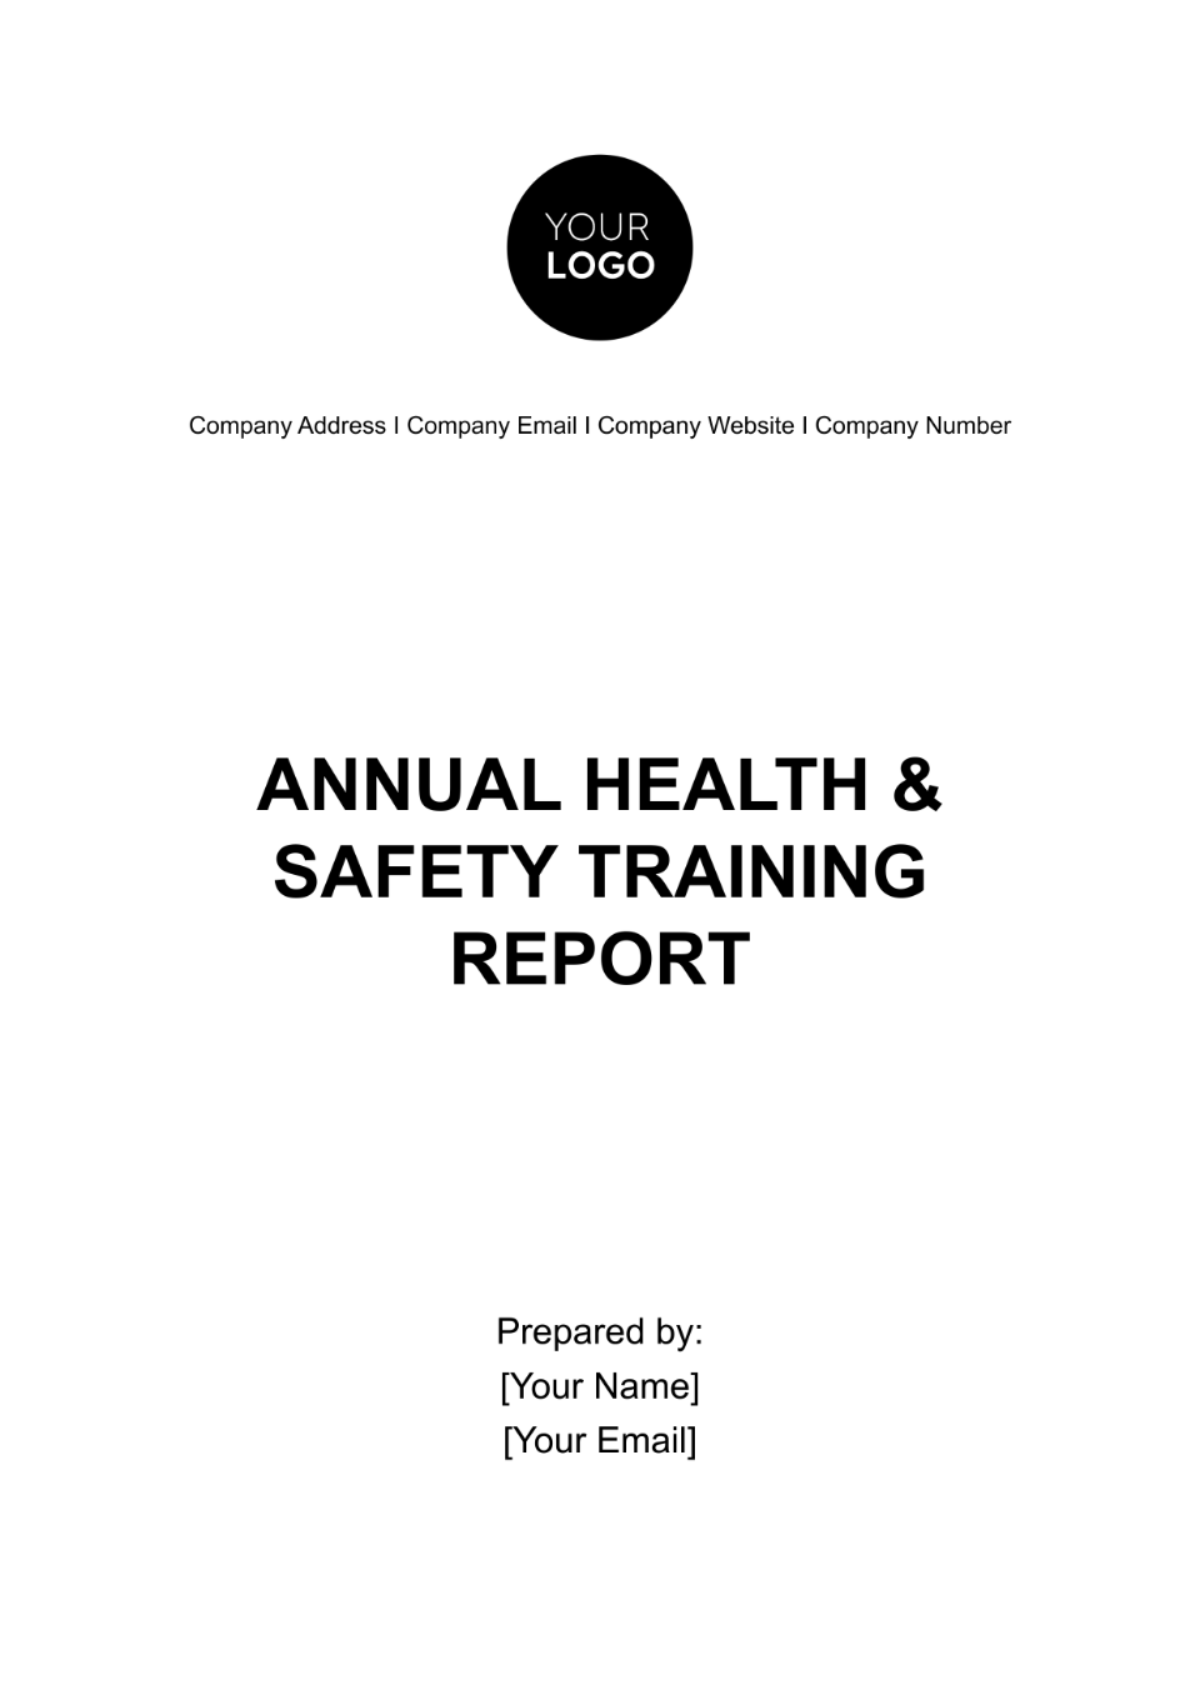 Annual Health & Safety Training Report Template